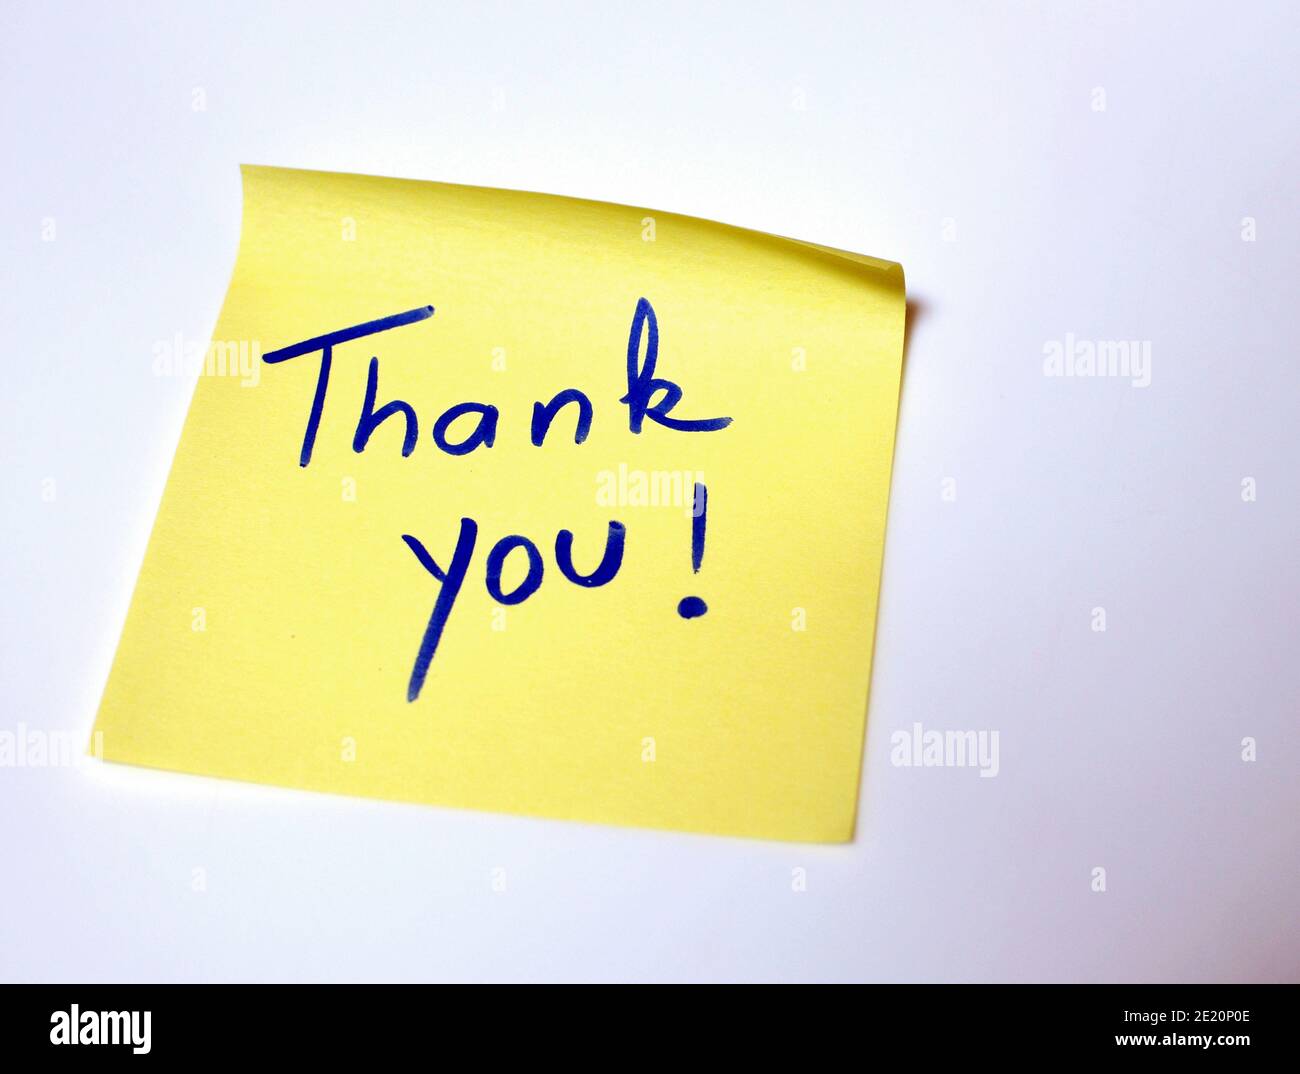 The sentence Thank you written by hand on a yellow post it and put on the white table Stock Photo